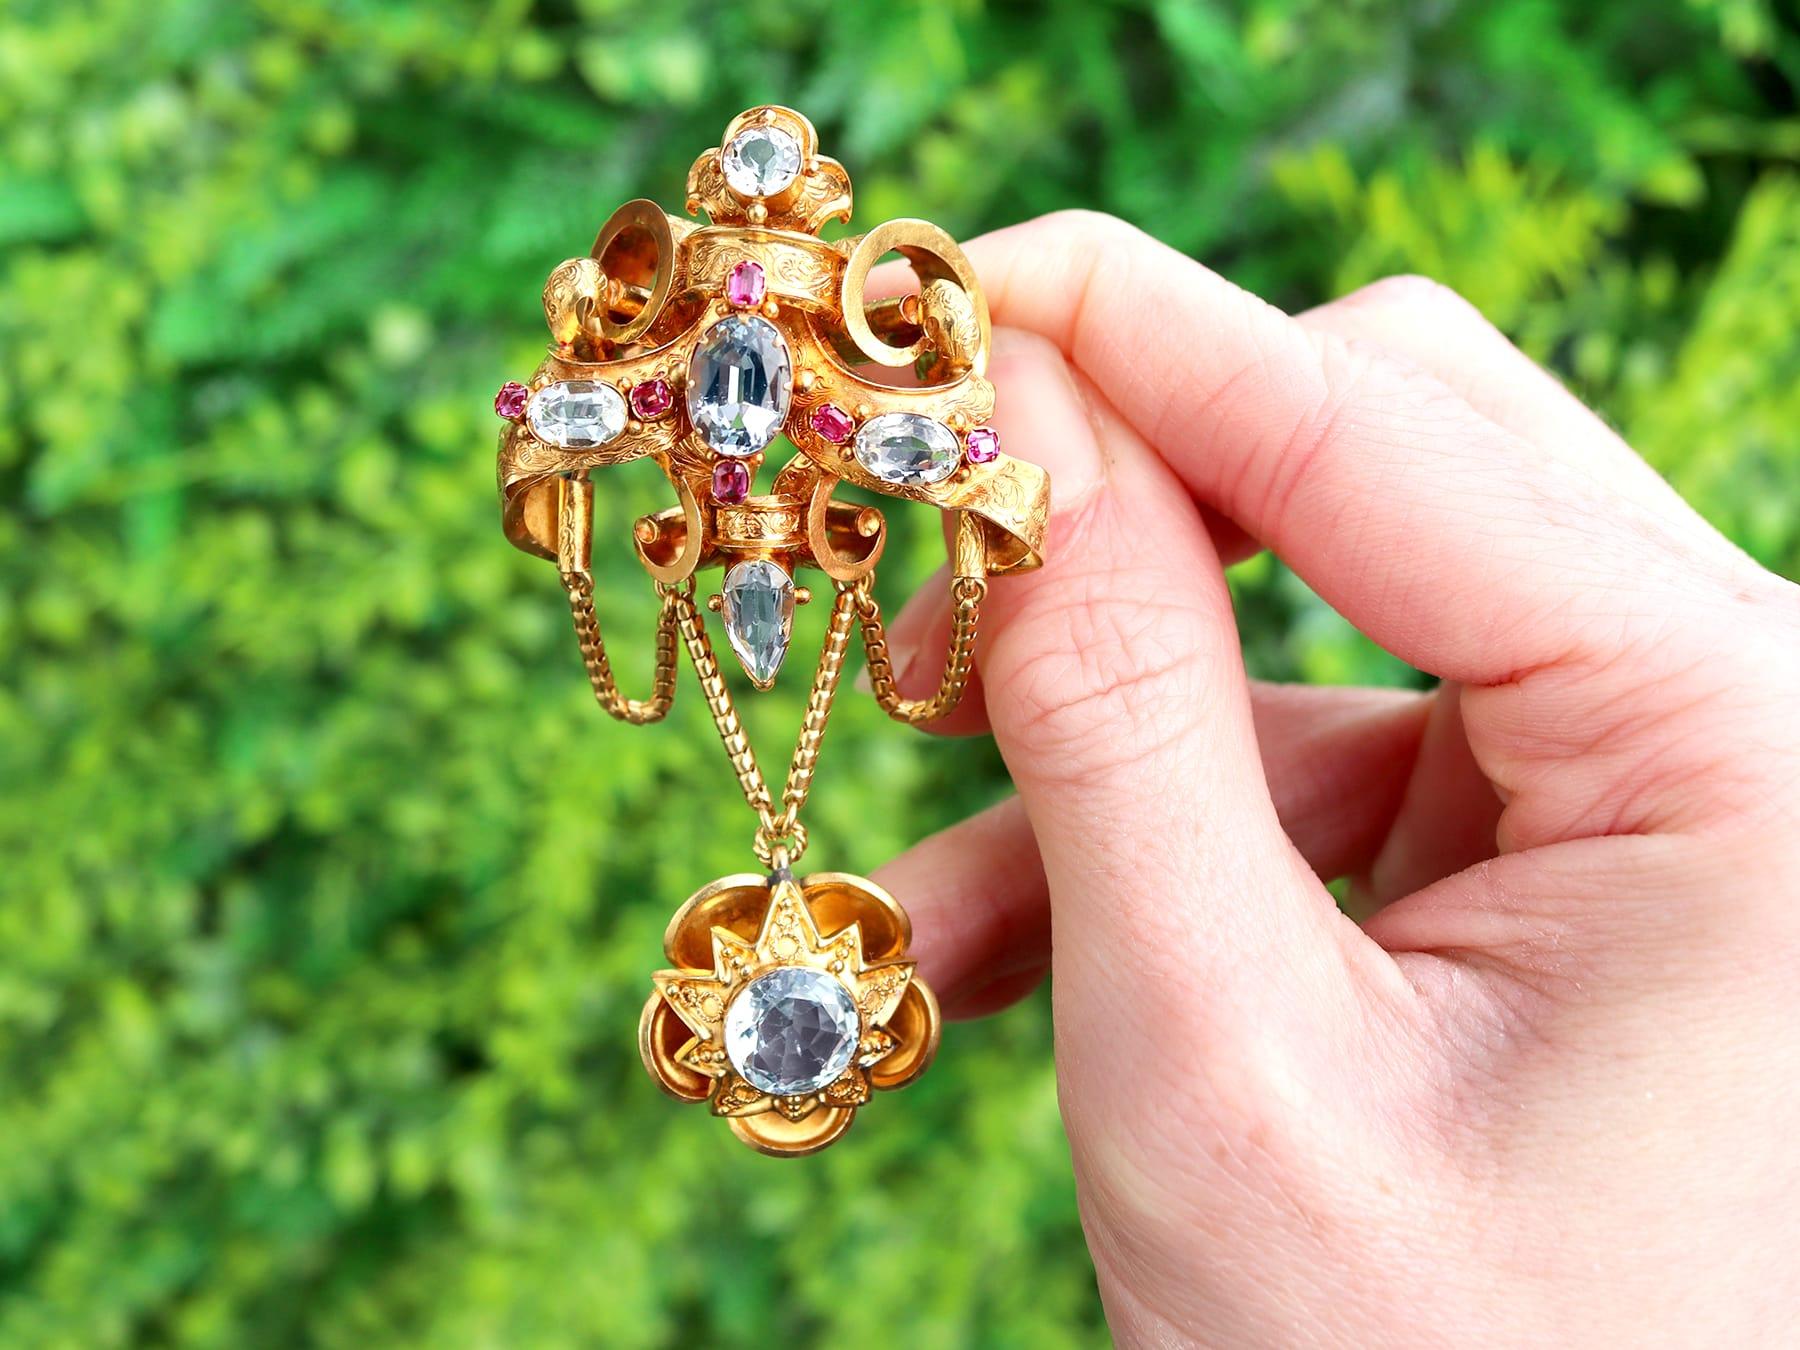 An exceptional, fine and impressive antique 8.65 carat aquamarine and 0.20 carat ruby, 21 karat yellow gold brooch; part of our diverse antique Victorian brooch collections.

This exceptional, fine and impressive antique, early Victorian brooch has